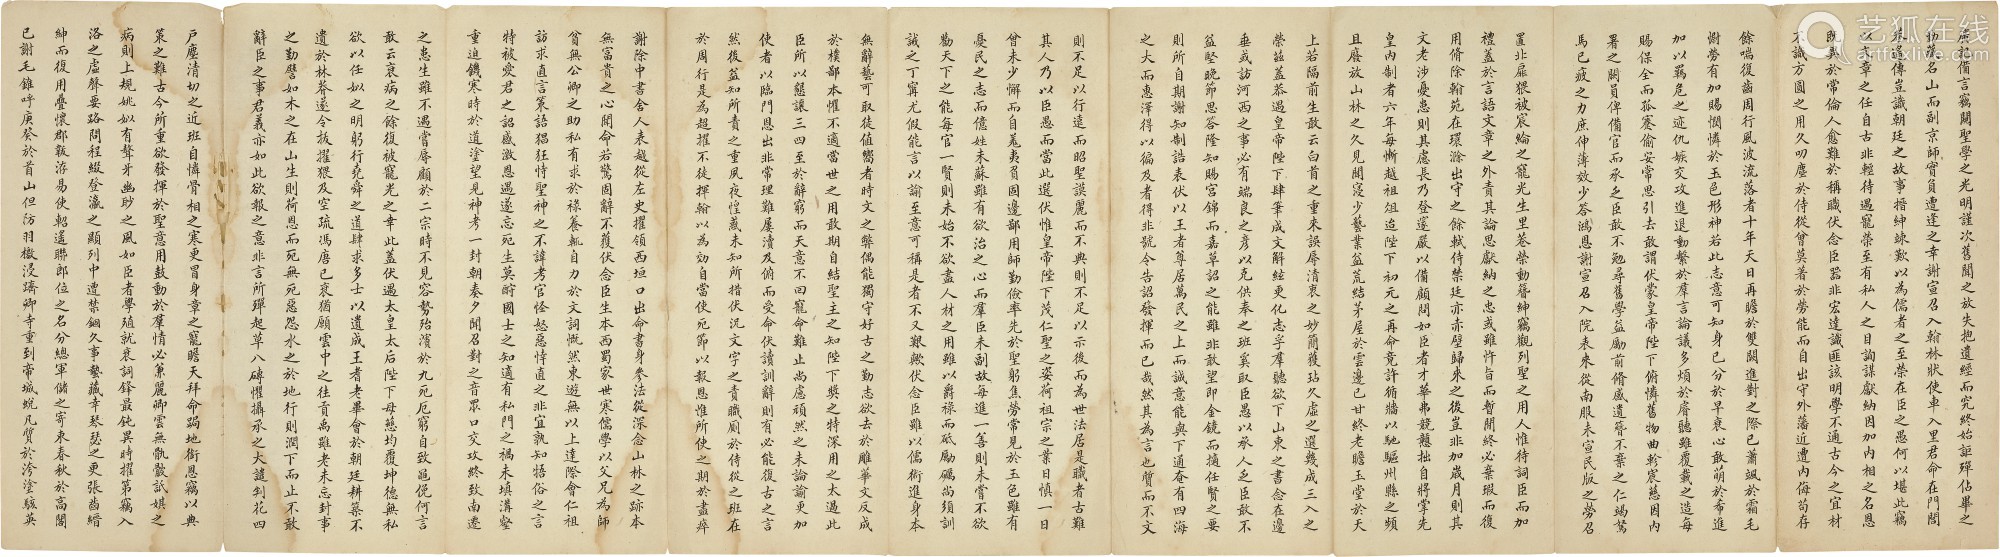 Anonymous Qing Dynasty 佚名 清 Manuscripts From The Qing Palace 清宮文稿集粹 Deal Price Picture